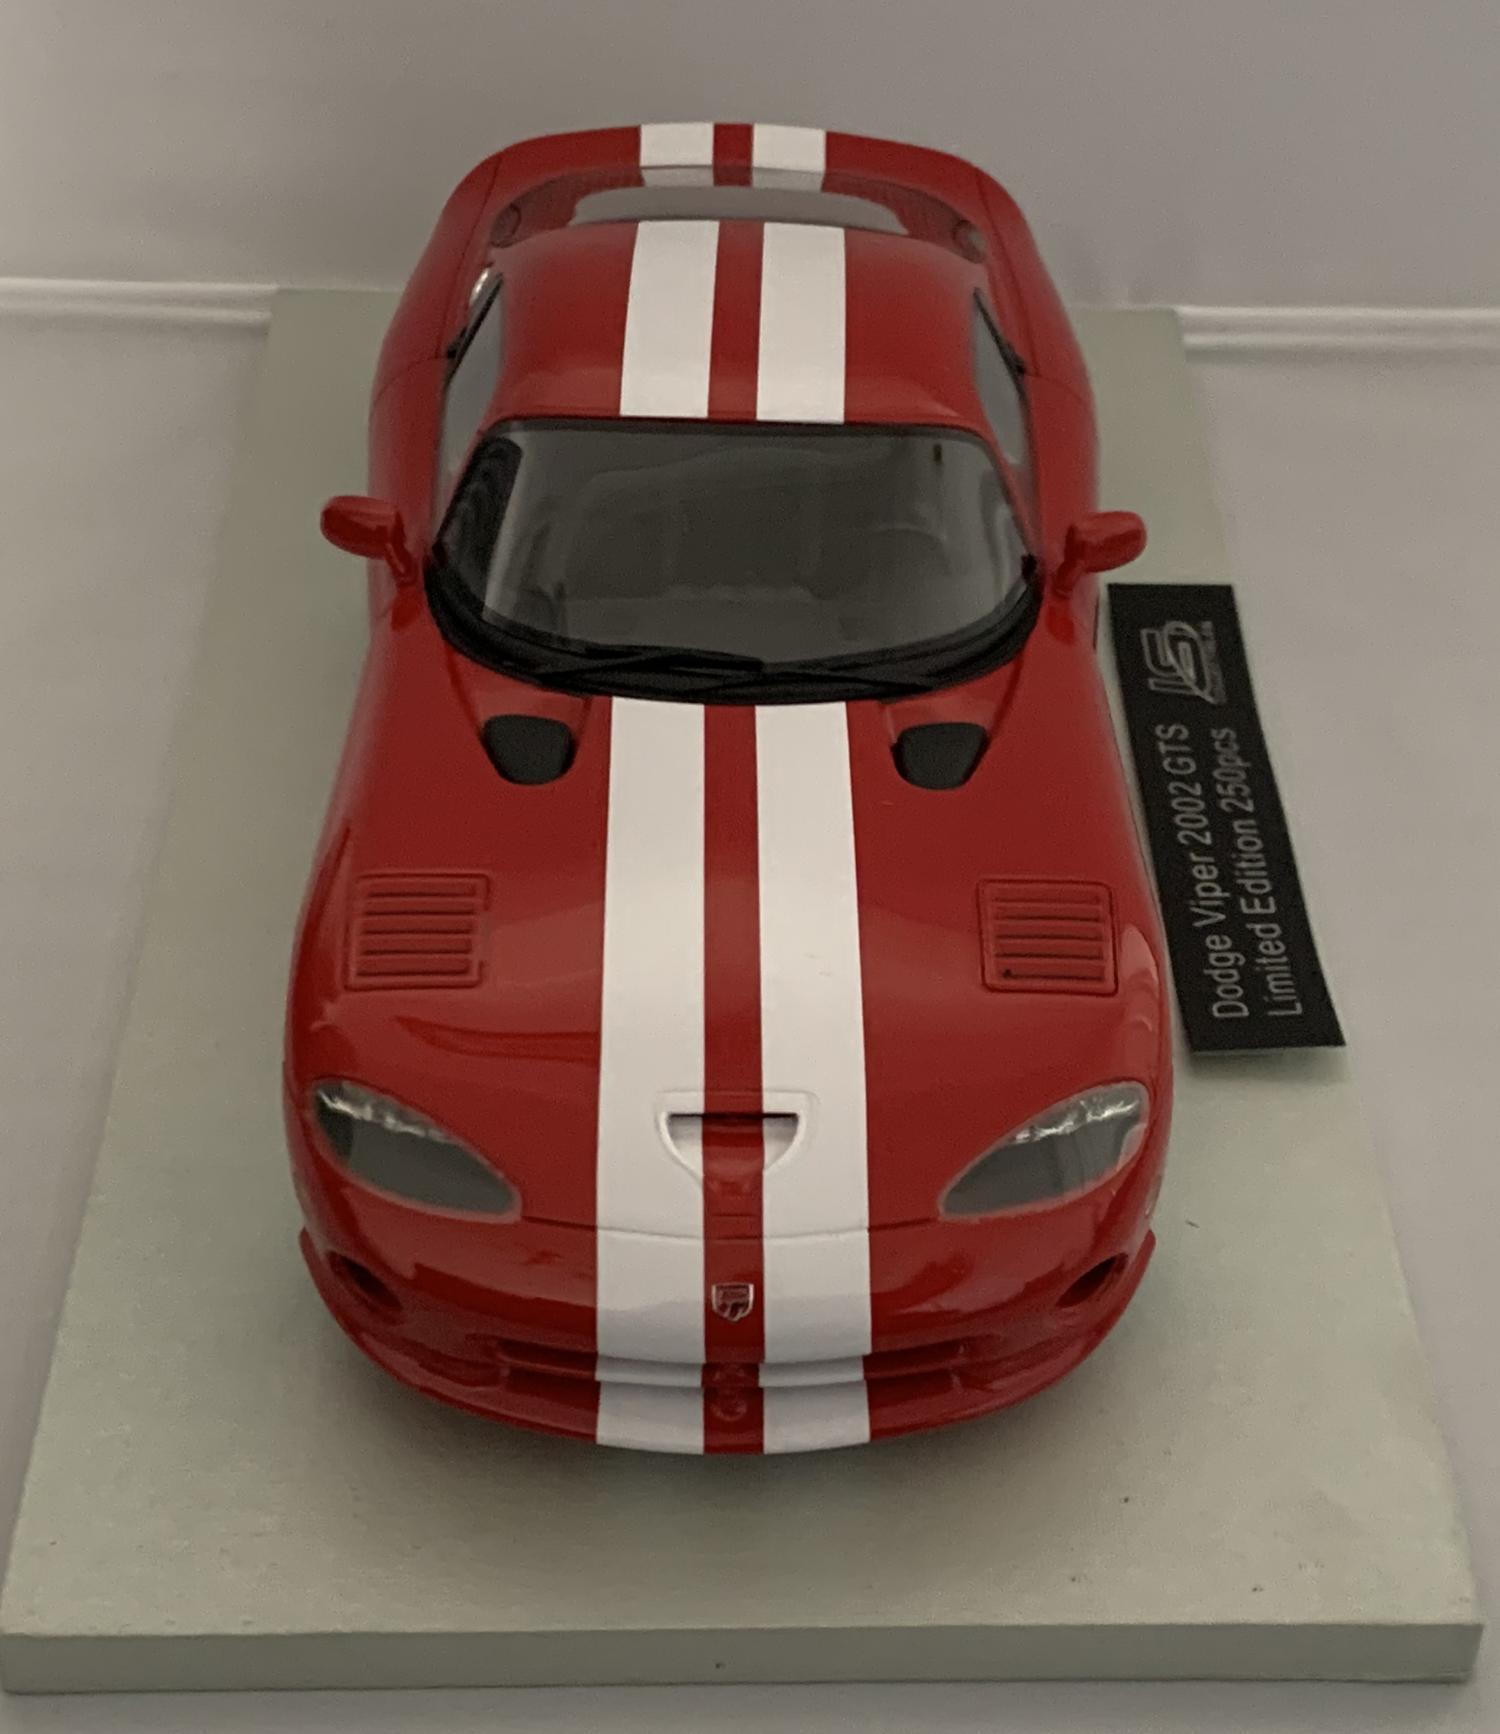 Dodge Viper GTS 2002 in red 1:18 scale Resin model from LS Collectibles